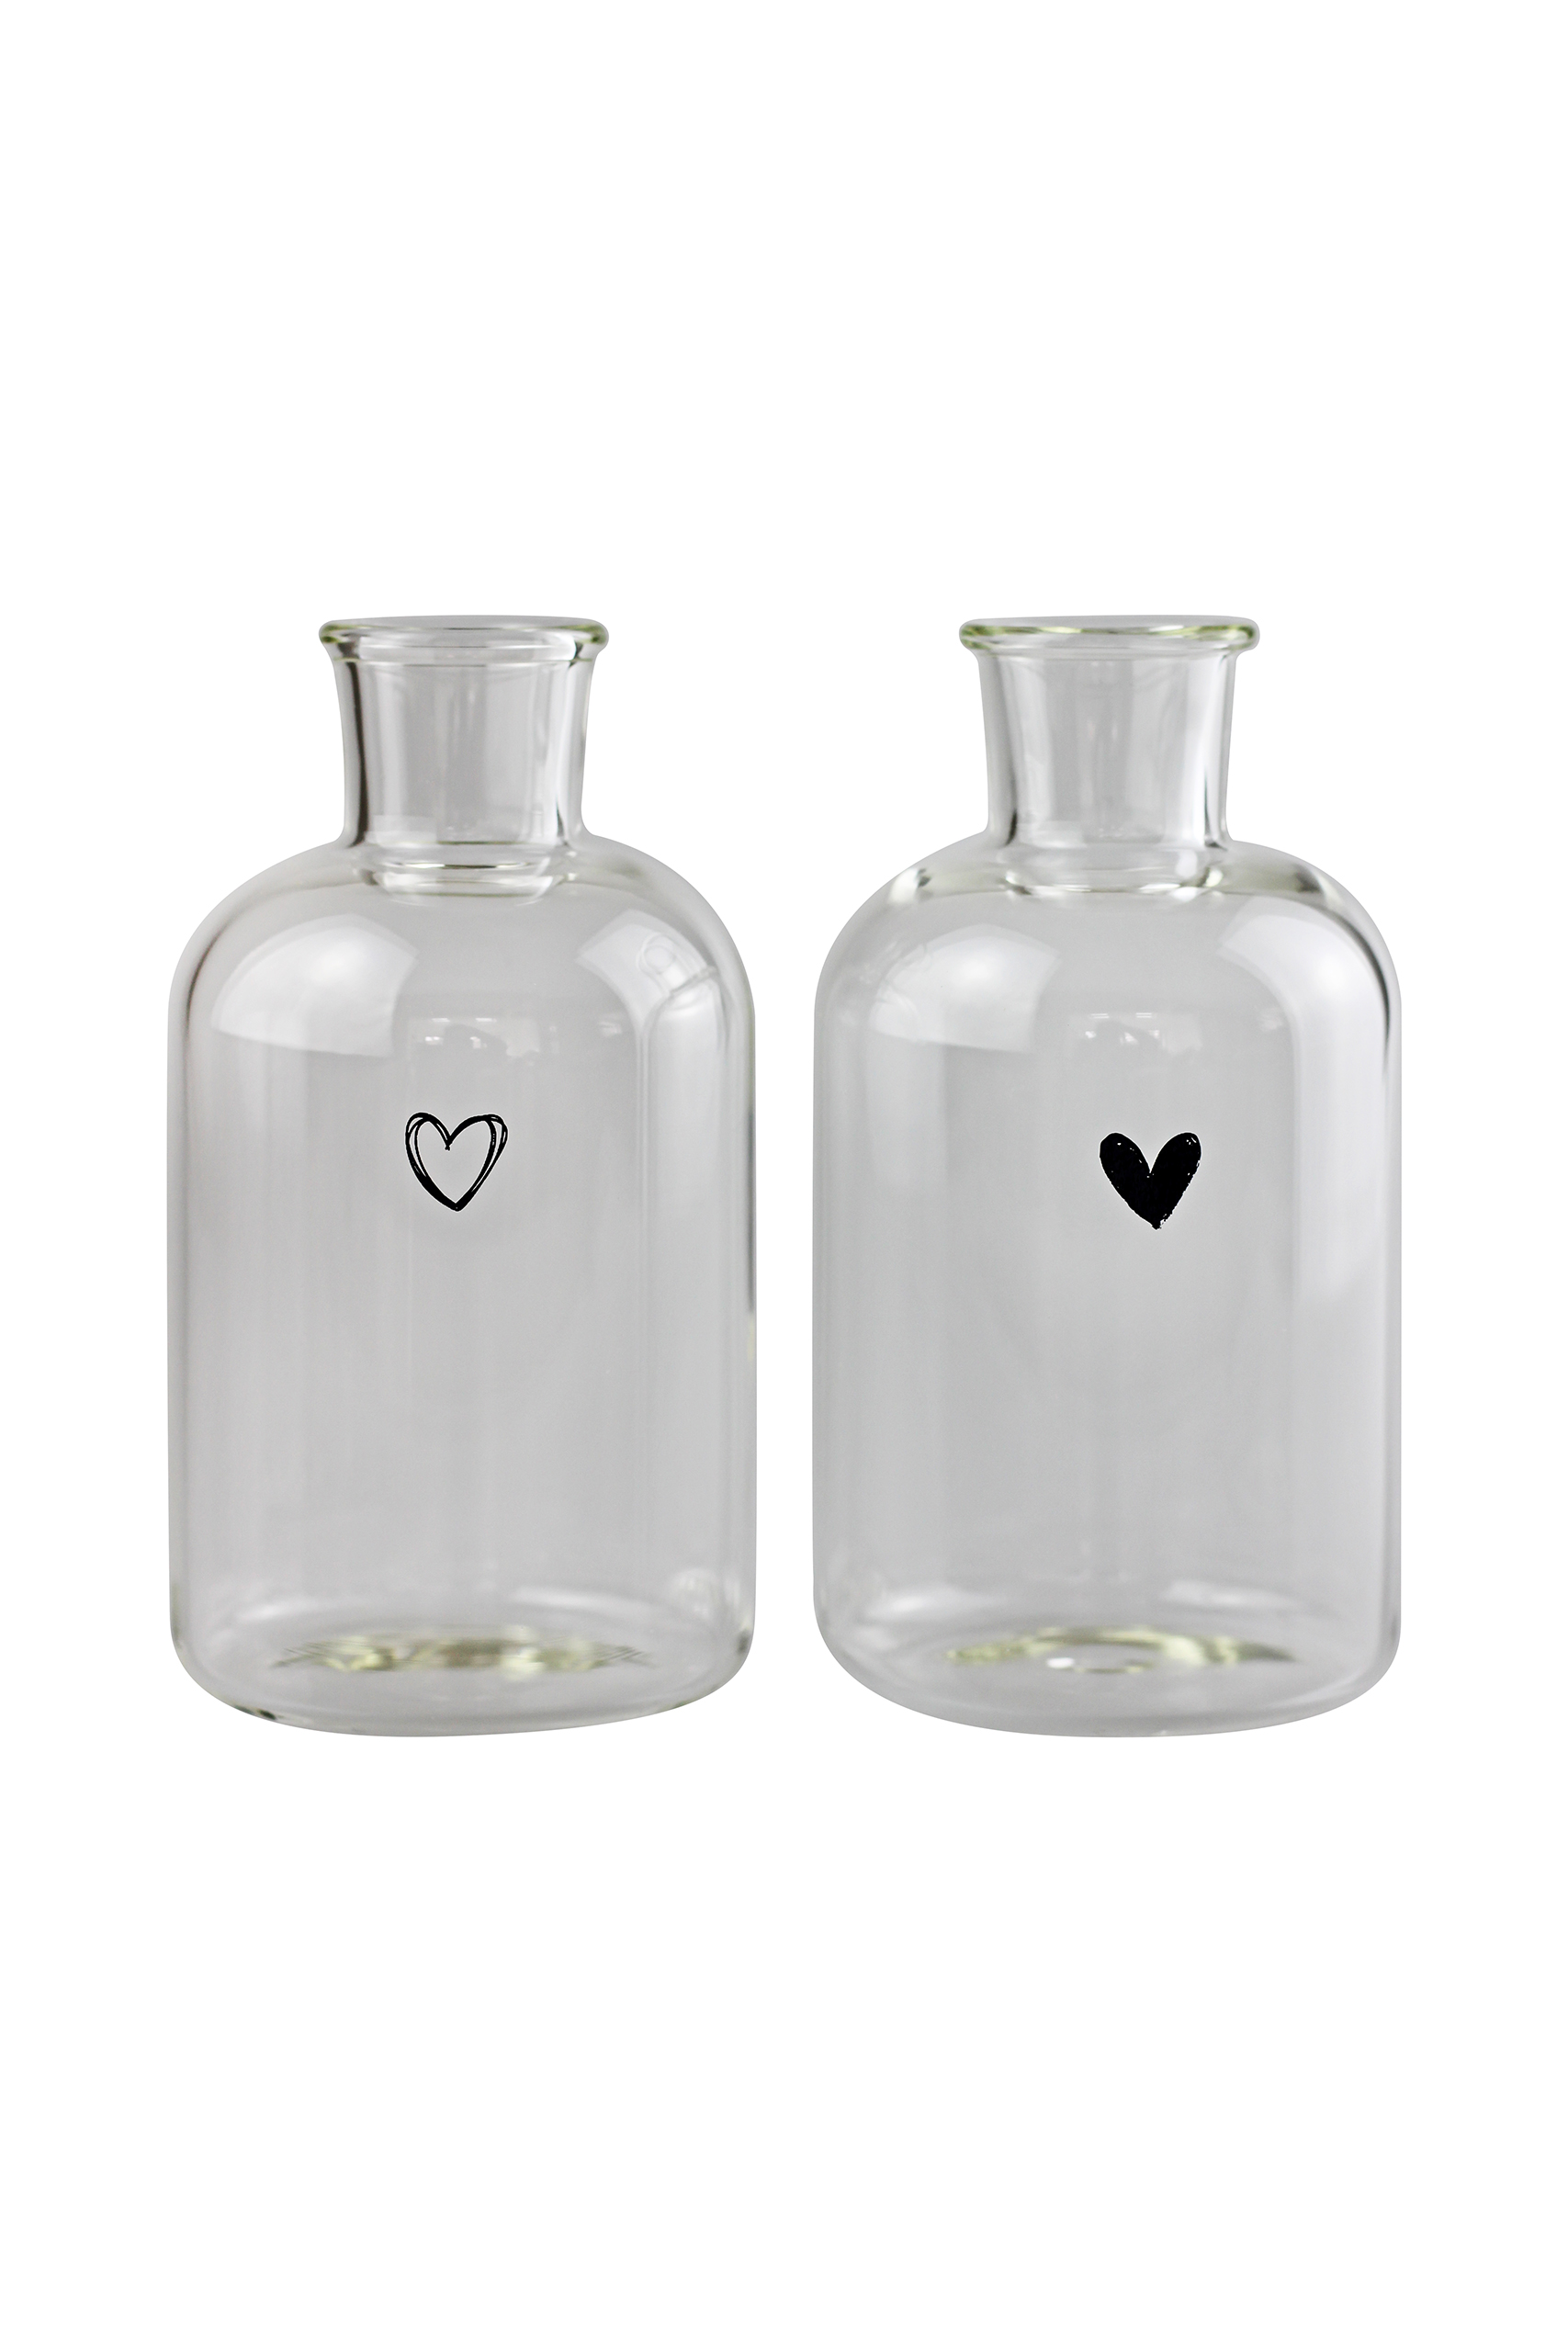 Small Black Heart Glass Candlestick Holders Set of 2 (Inc 12 candles) | Pretty Little Home